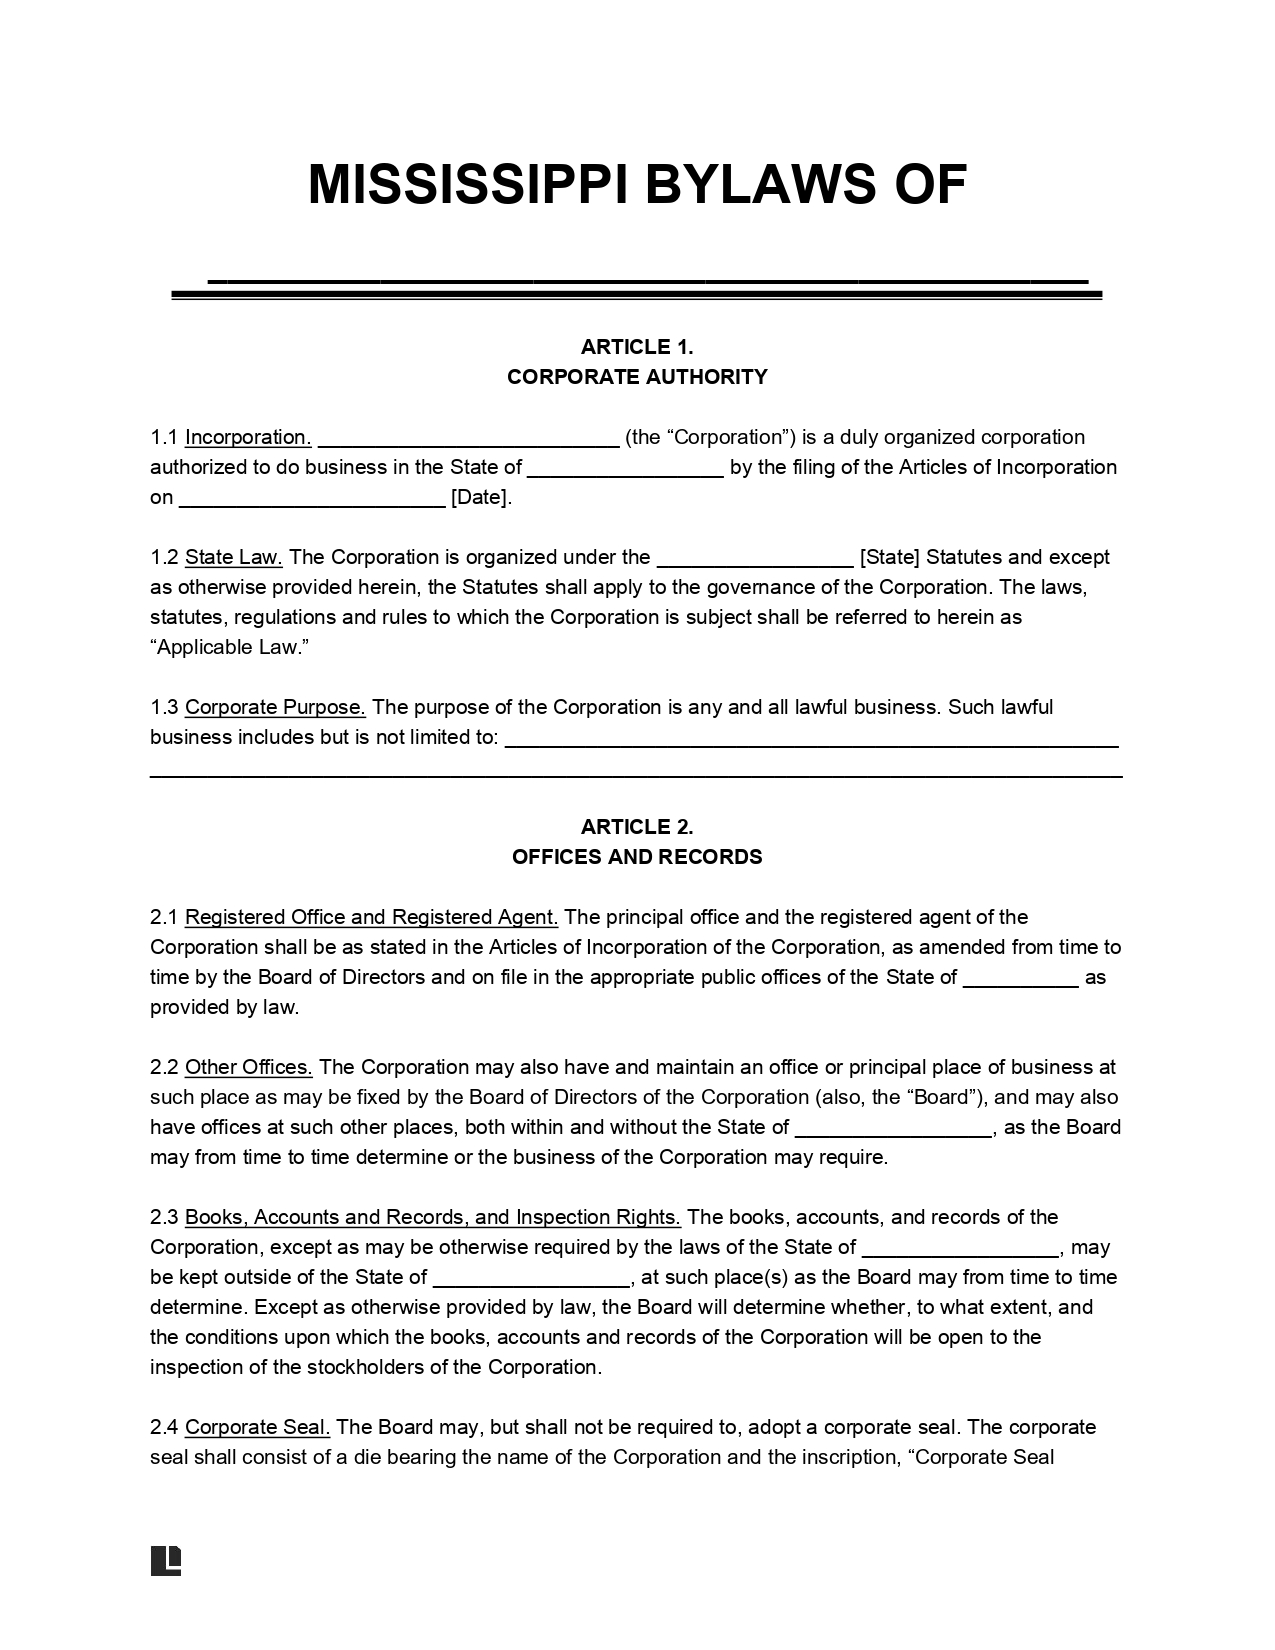 Mississippi Corporate Bylaws Template